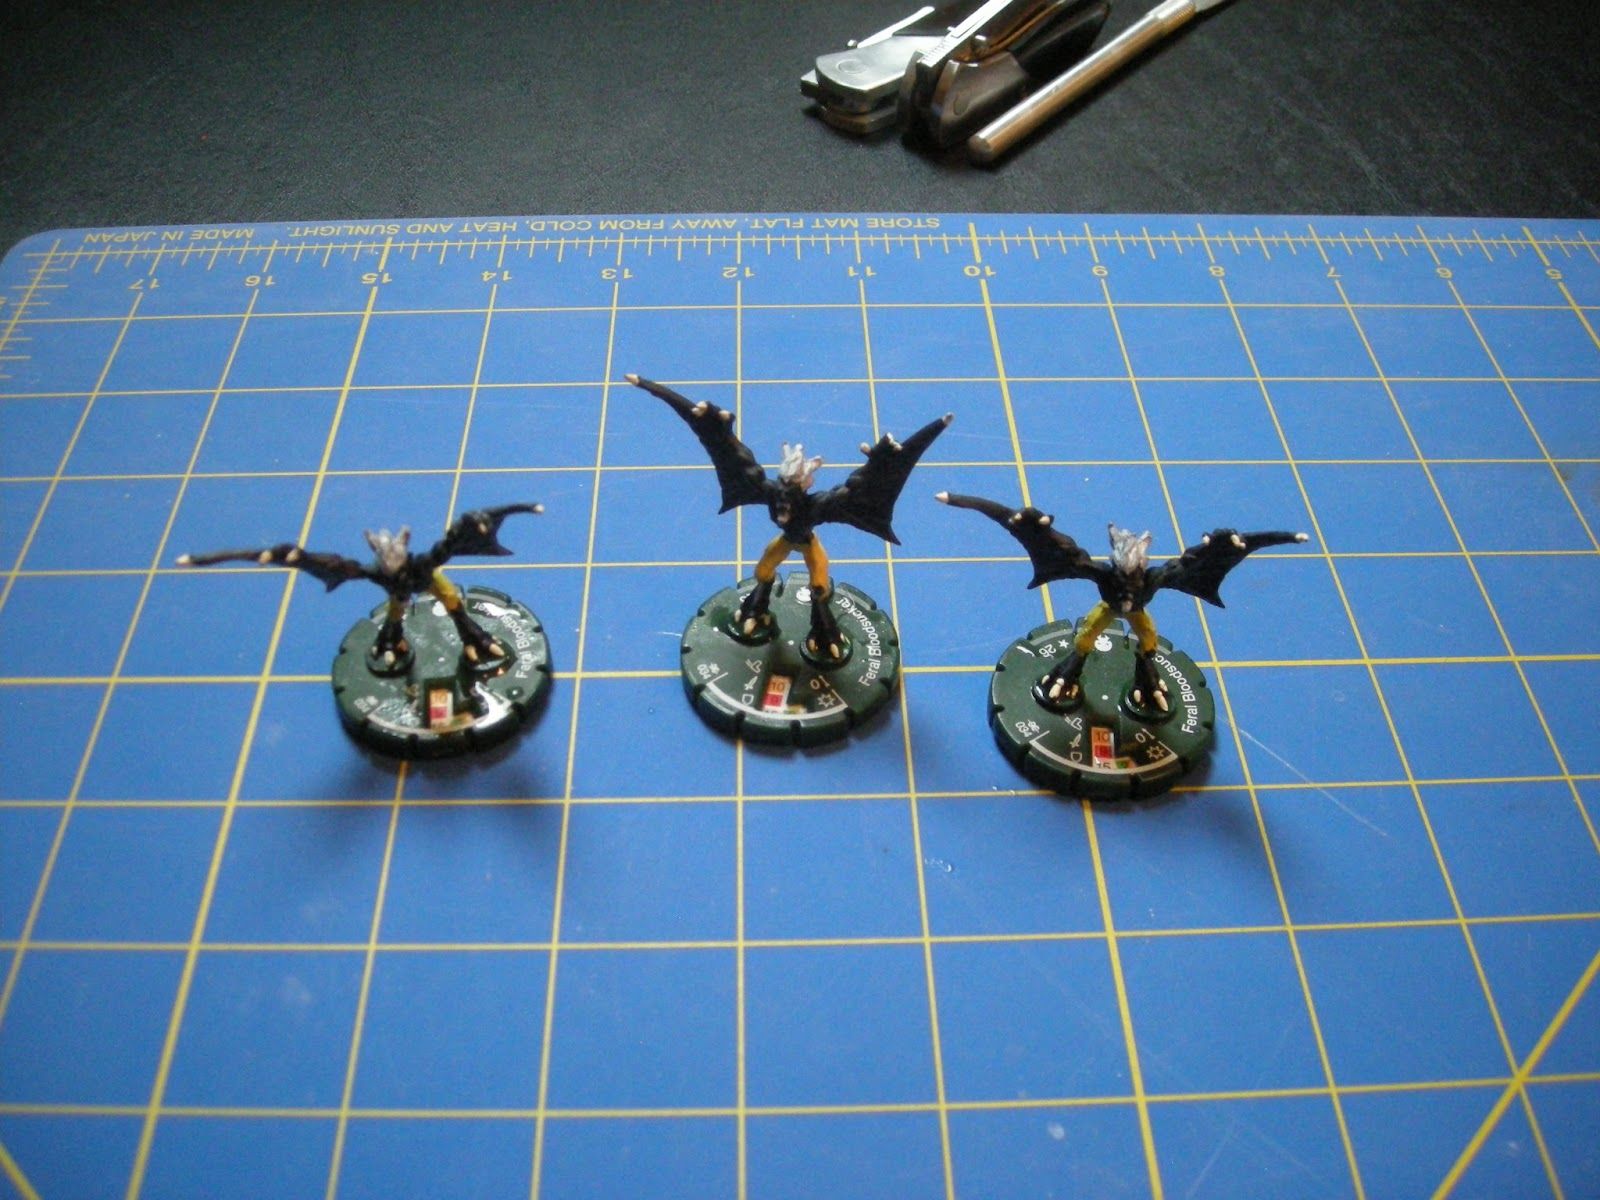 Three black bat-winged Mage Knight figures with white claws and hair and yellow pants stand on a blue and yellow cutting mat.